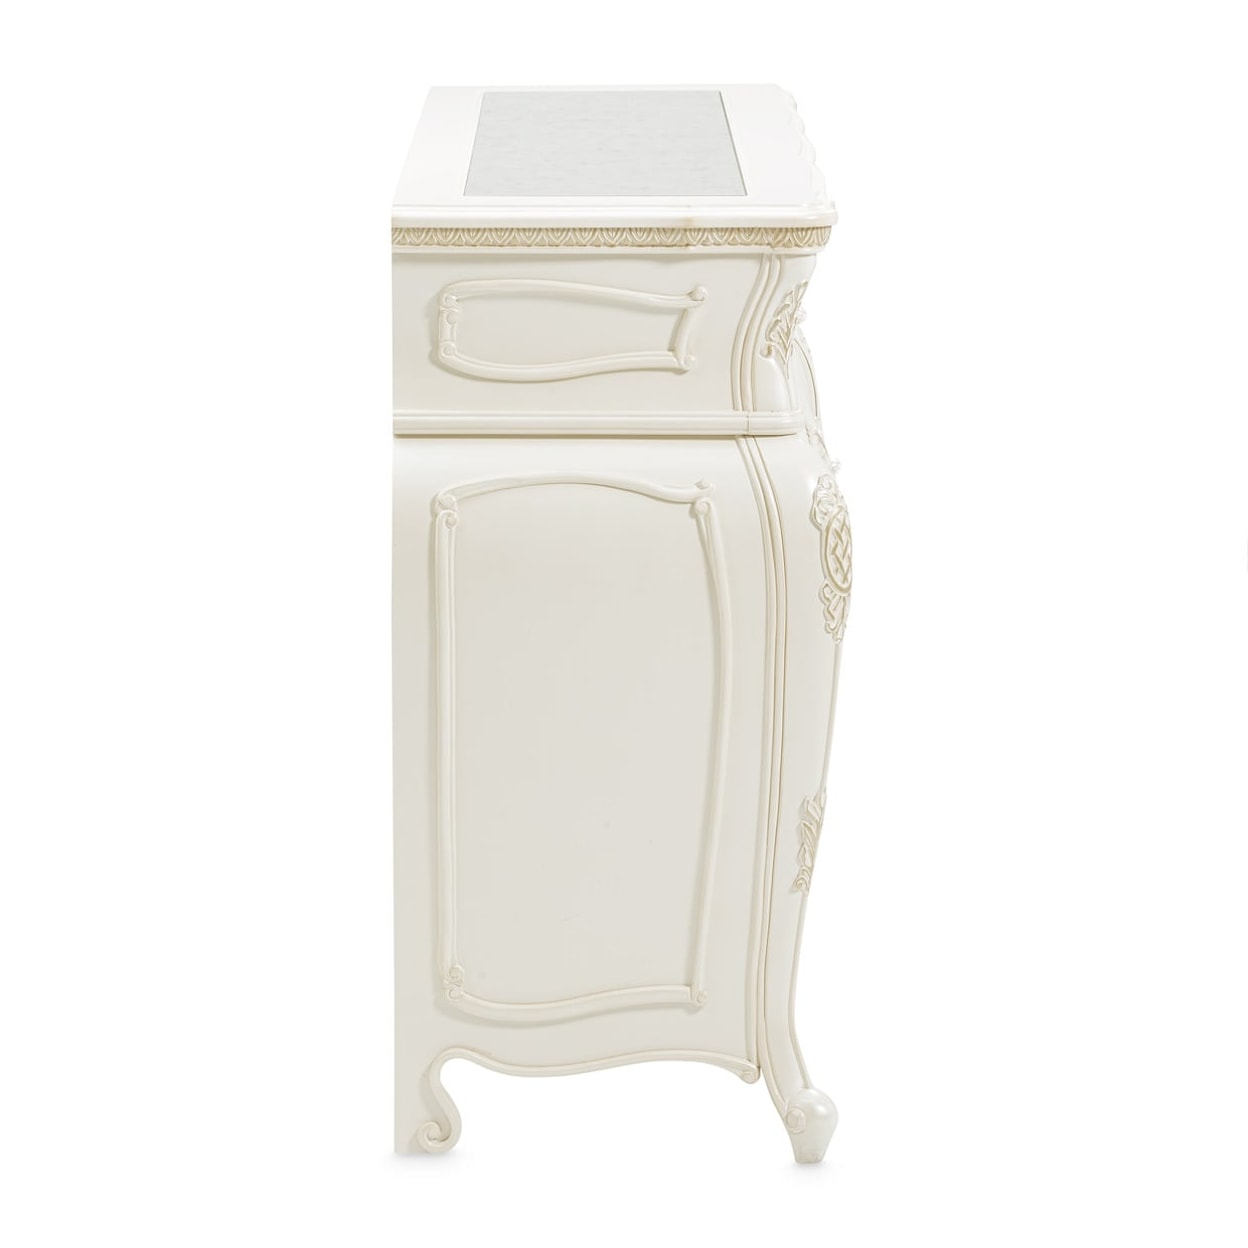 Michael Amini Lavelle Classic Pearl 3-Drawer Sideboard